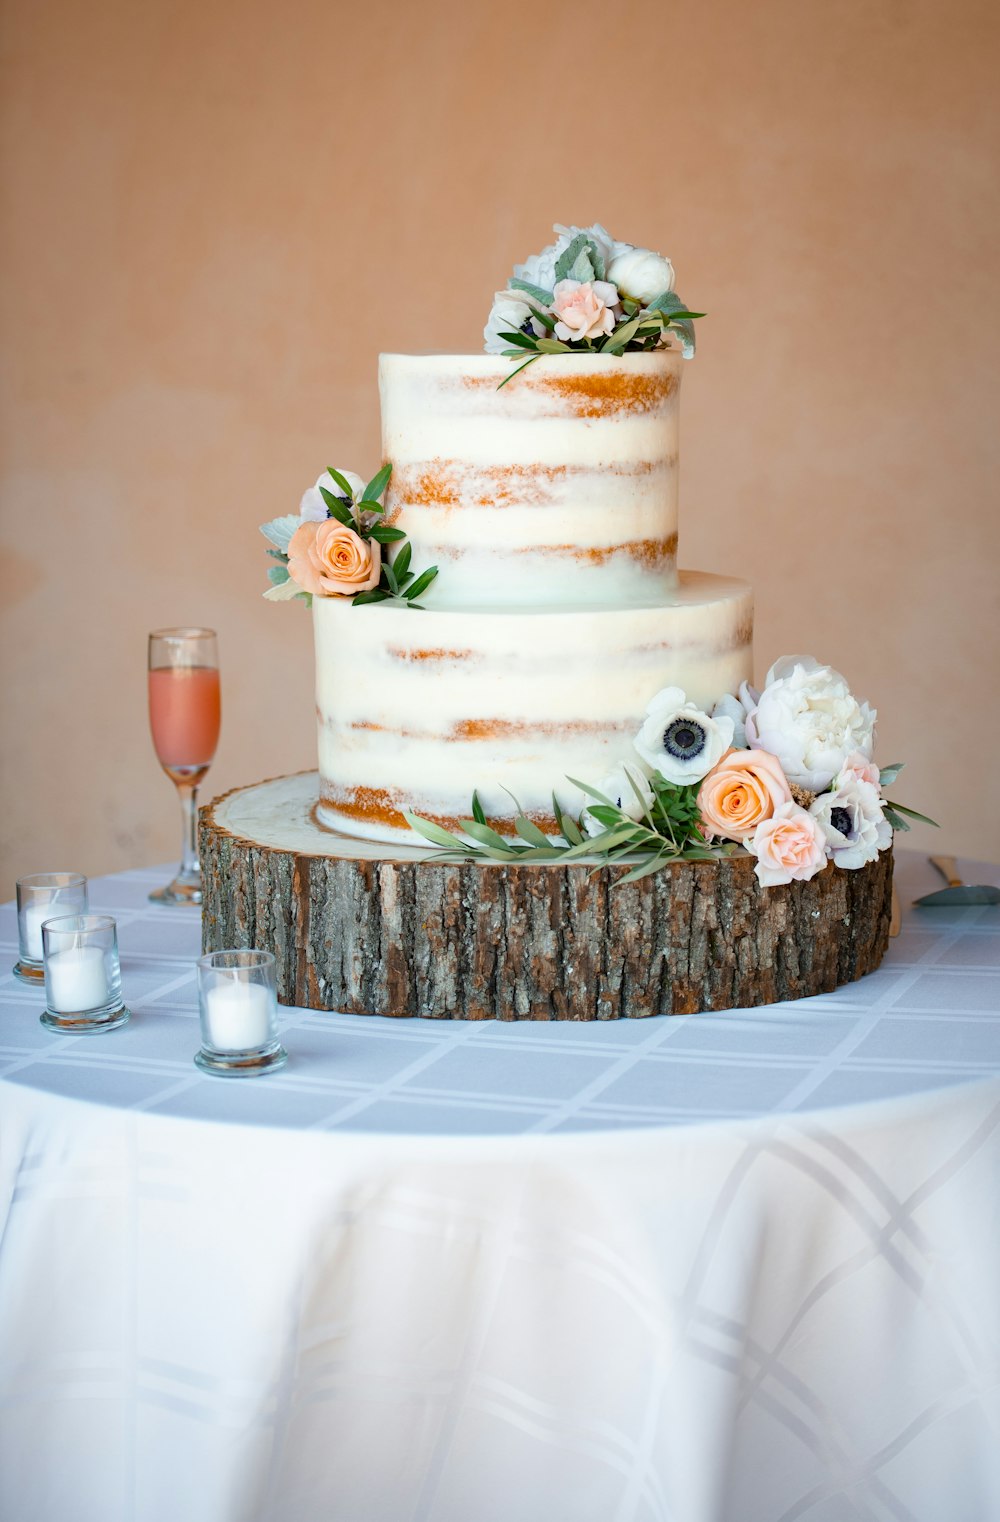 white and brown cake on brown woven tray